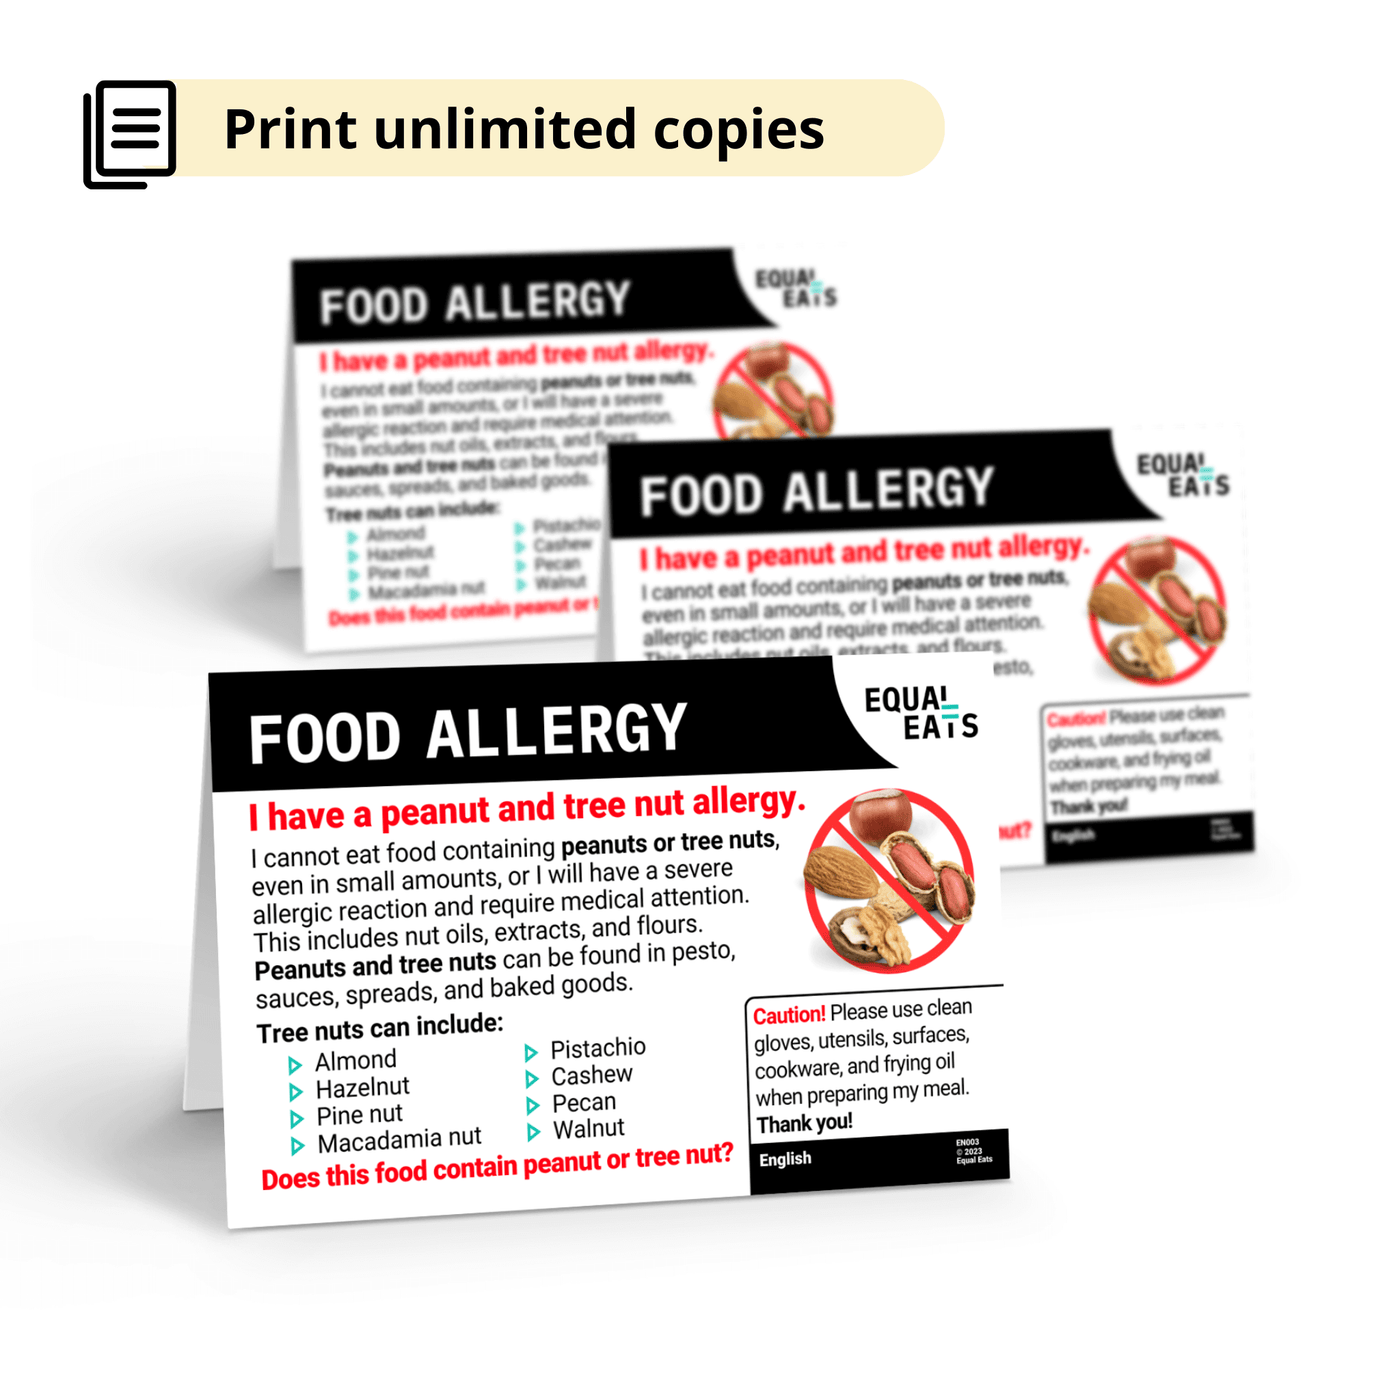 Printable Peanut and Tree Nut Allergy Card in Simplified Chinese